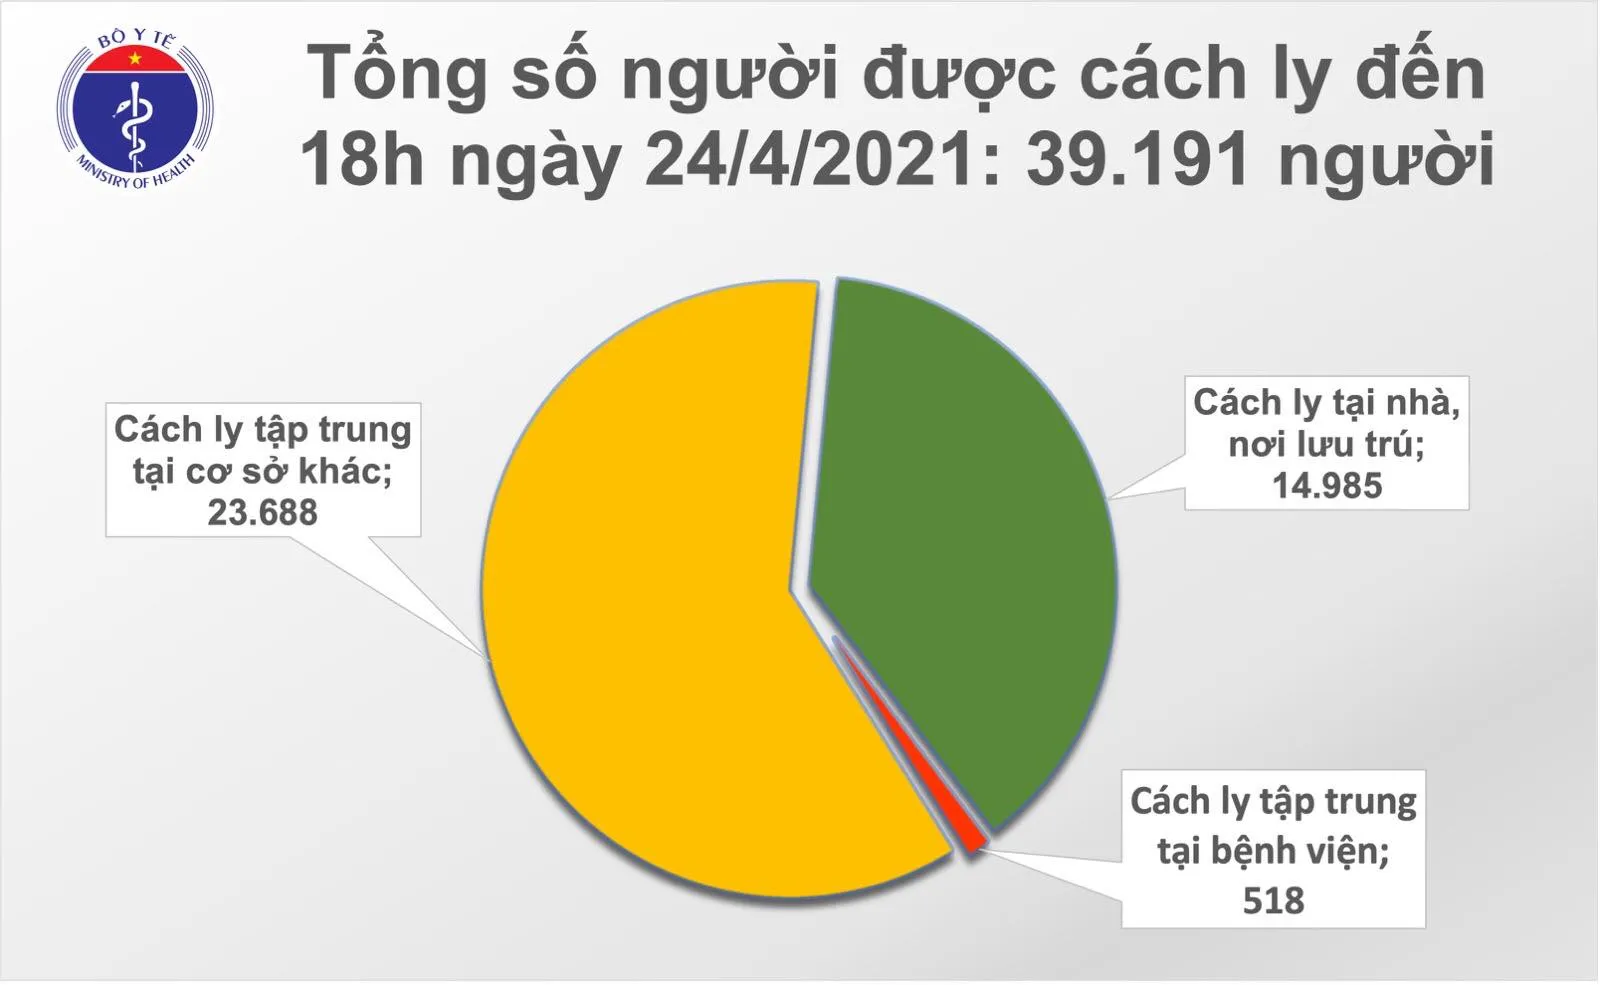 dich-covid-19-toi-24-4-them-1-ca-mac-moi-duoc-cach-ly-ngay-sau-nhap-canh-voh.com.vn-anh1